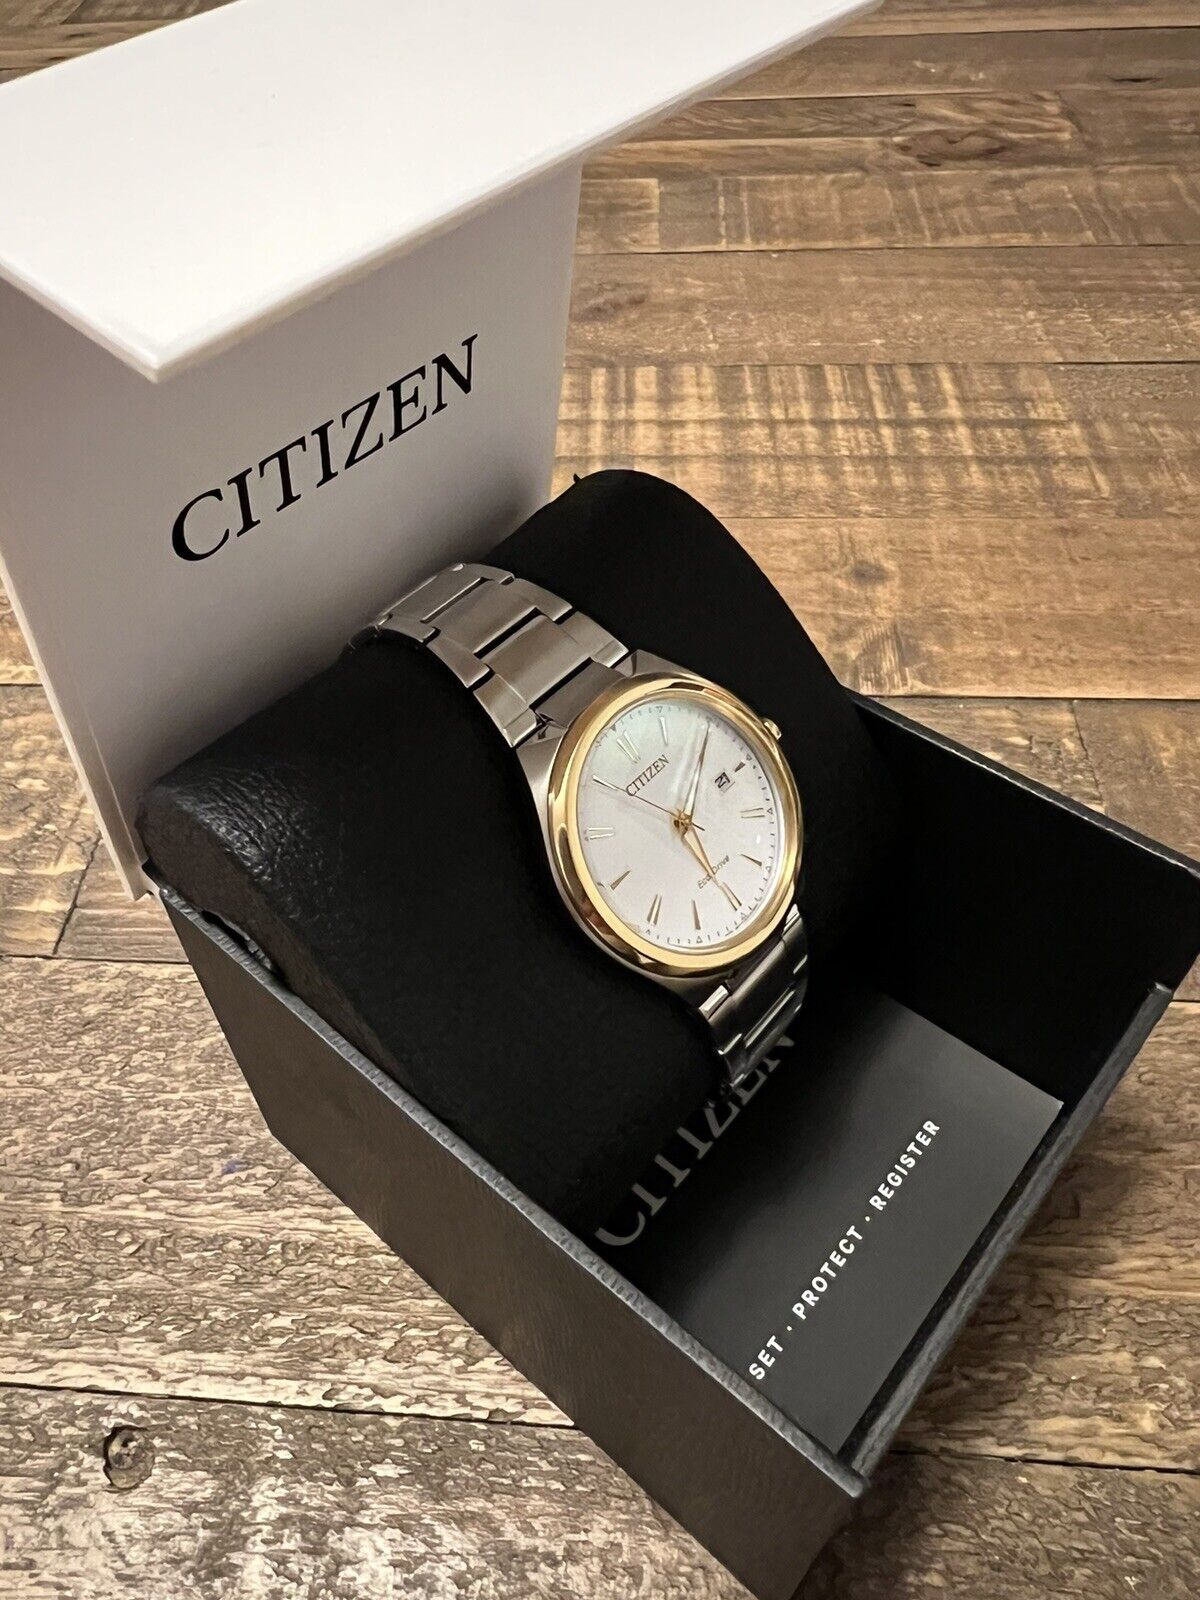 Citizen Eco-Drive Mens Watch - 39% Off Retail Price! ?